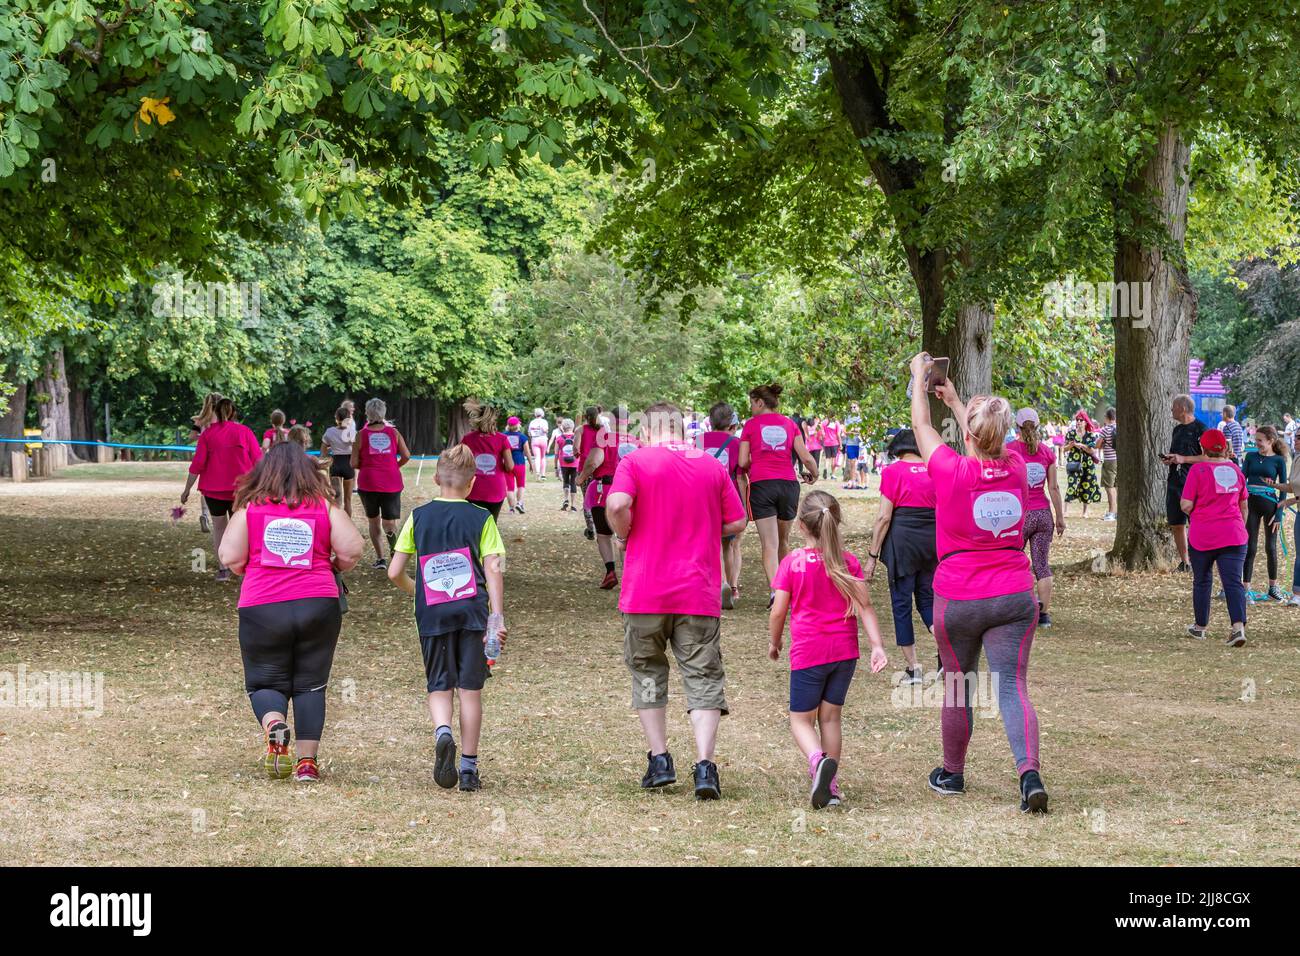 Abington Park, Northampton, UK. 24th July 2022. Race for Life raising funds for Cancer Research with over £88,000 being raised over the two day event of the weekend. Credit: Keith J Smith./Alamy Live News. Stock Photo